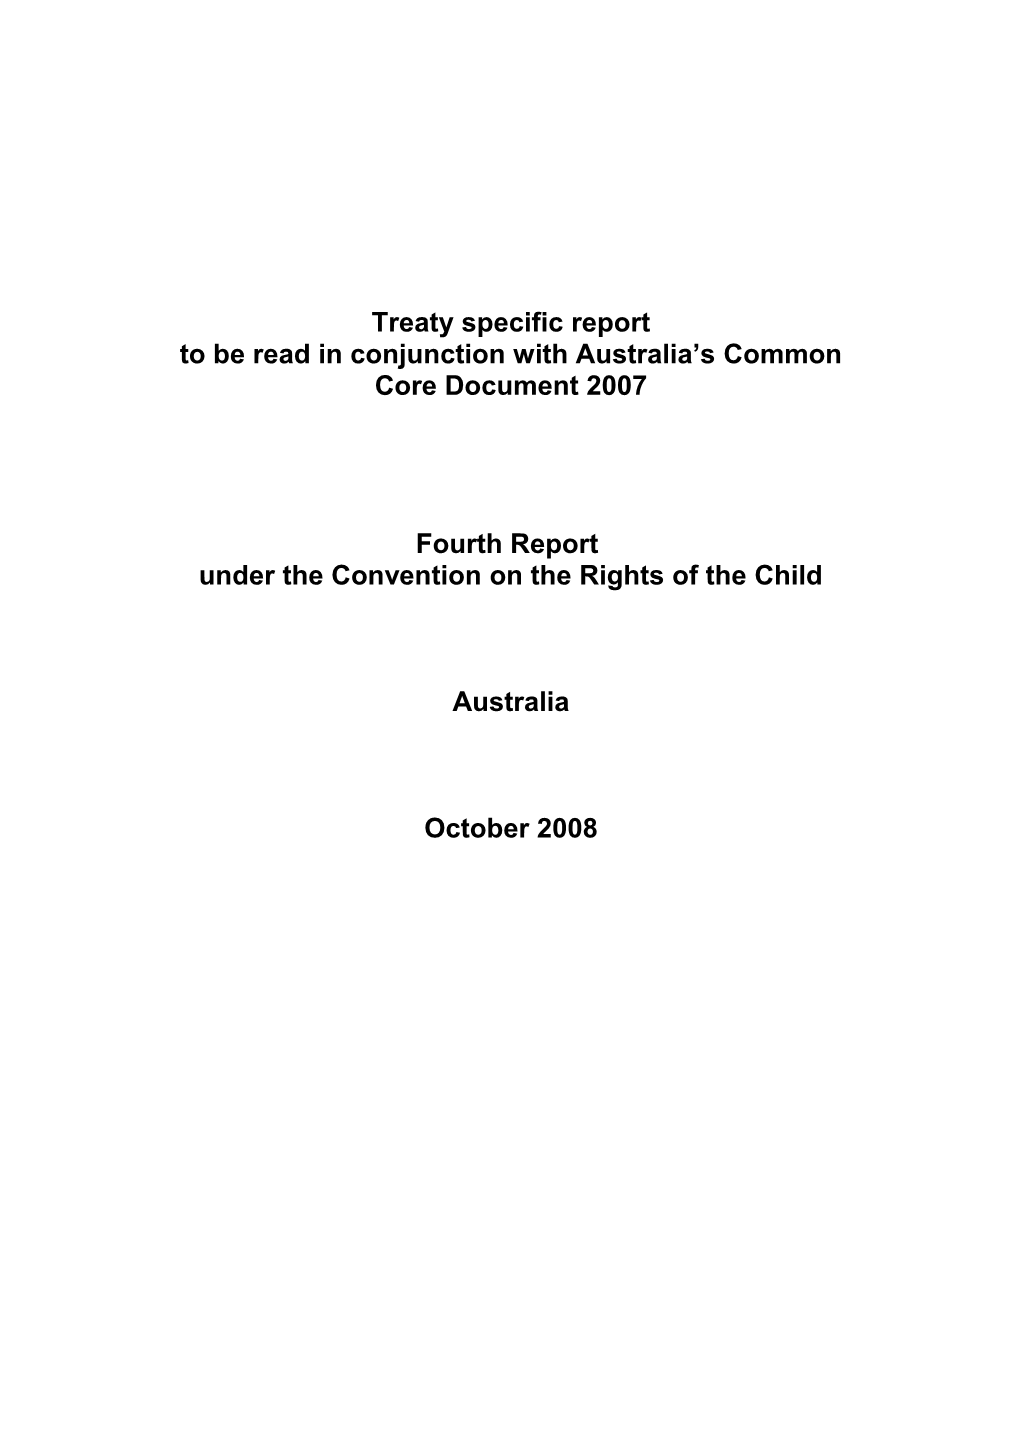 Australia S Fourth Report Under the Convention on the Rights of the Child